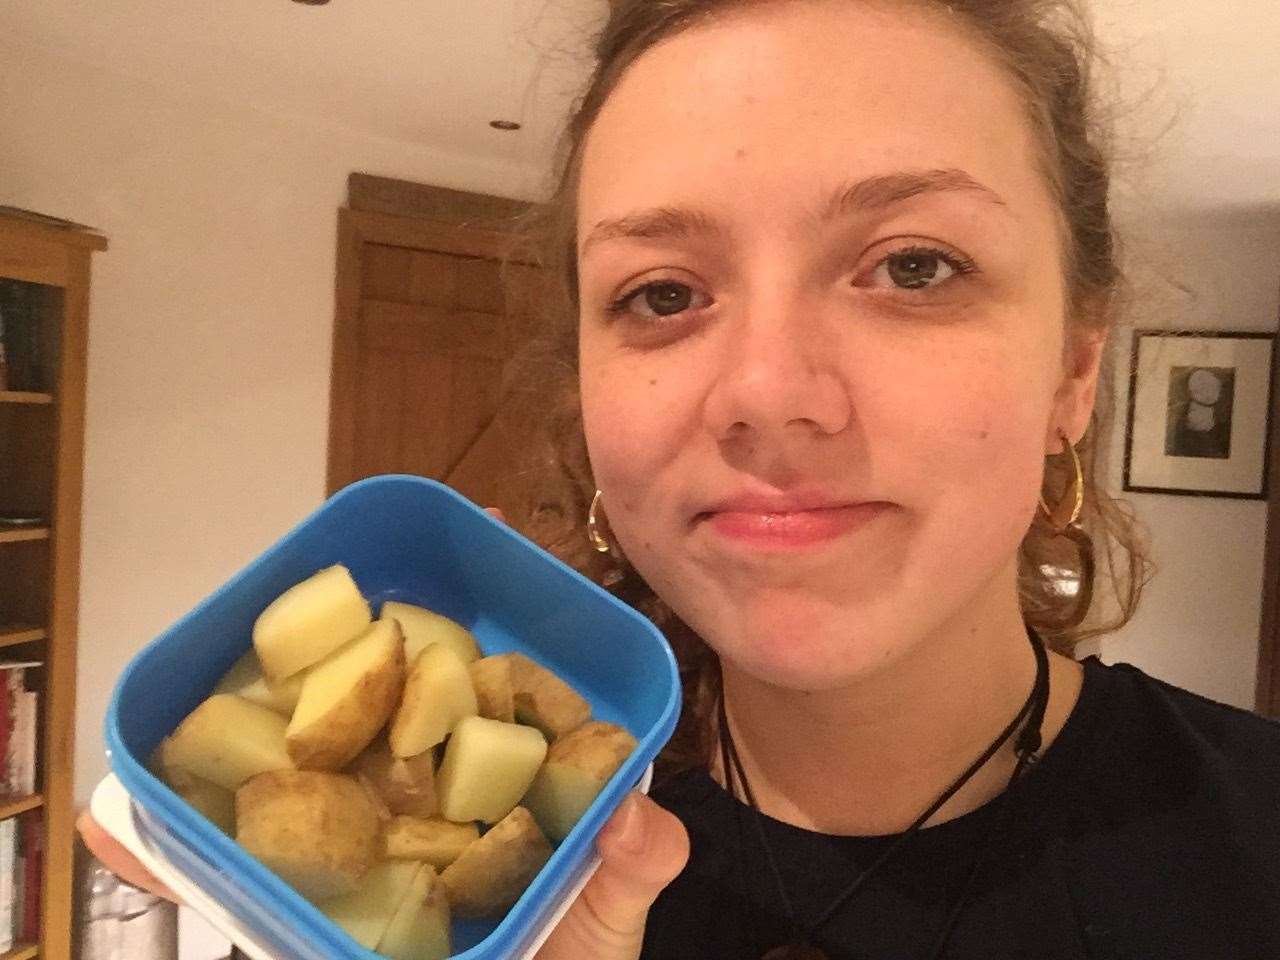 Me and my trusted potatoes